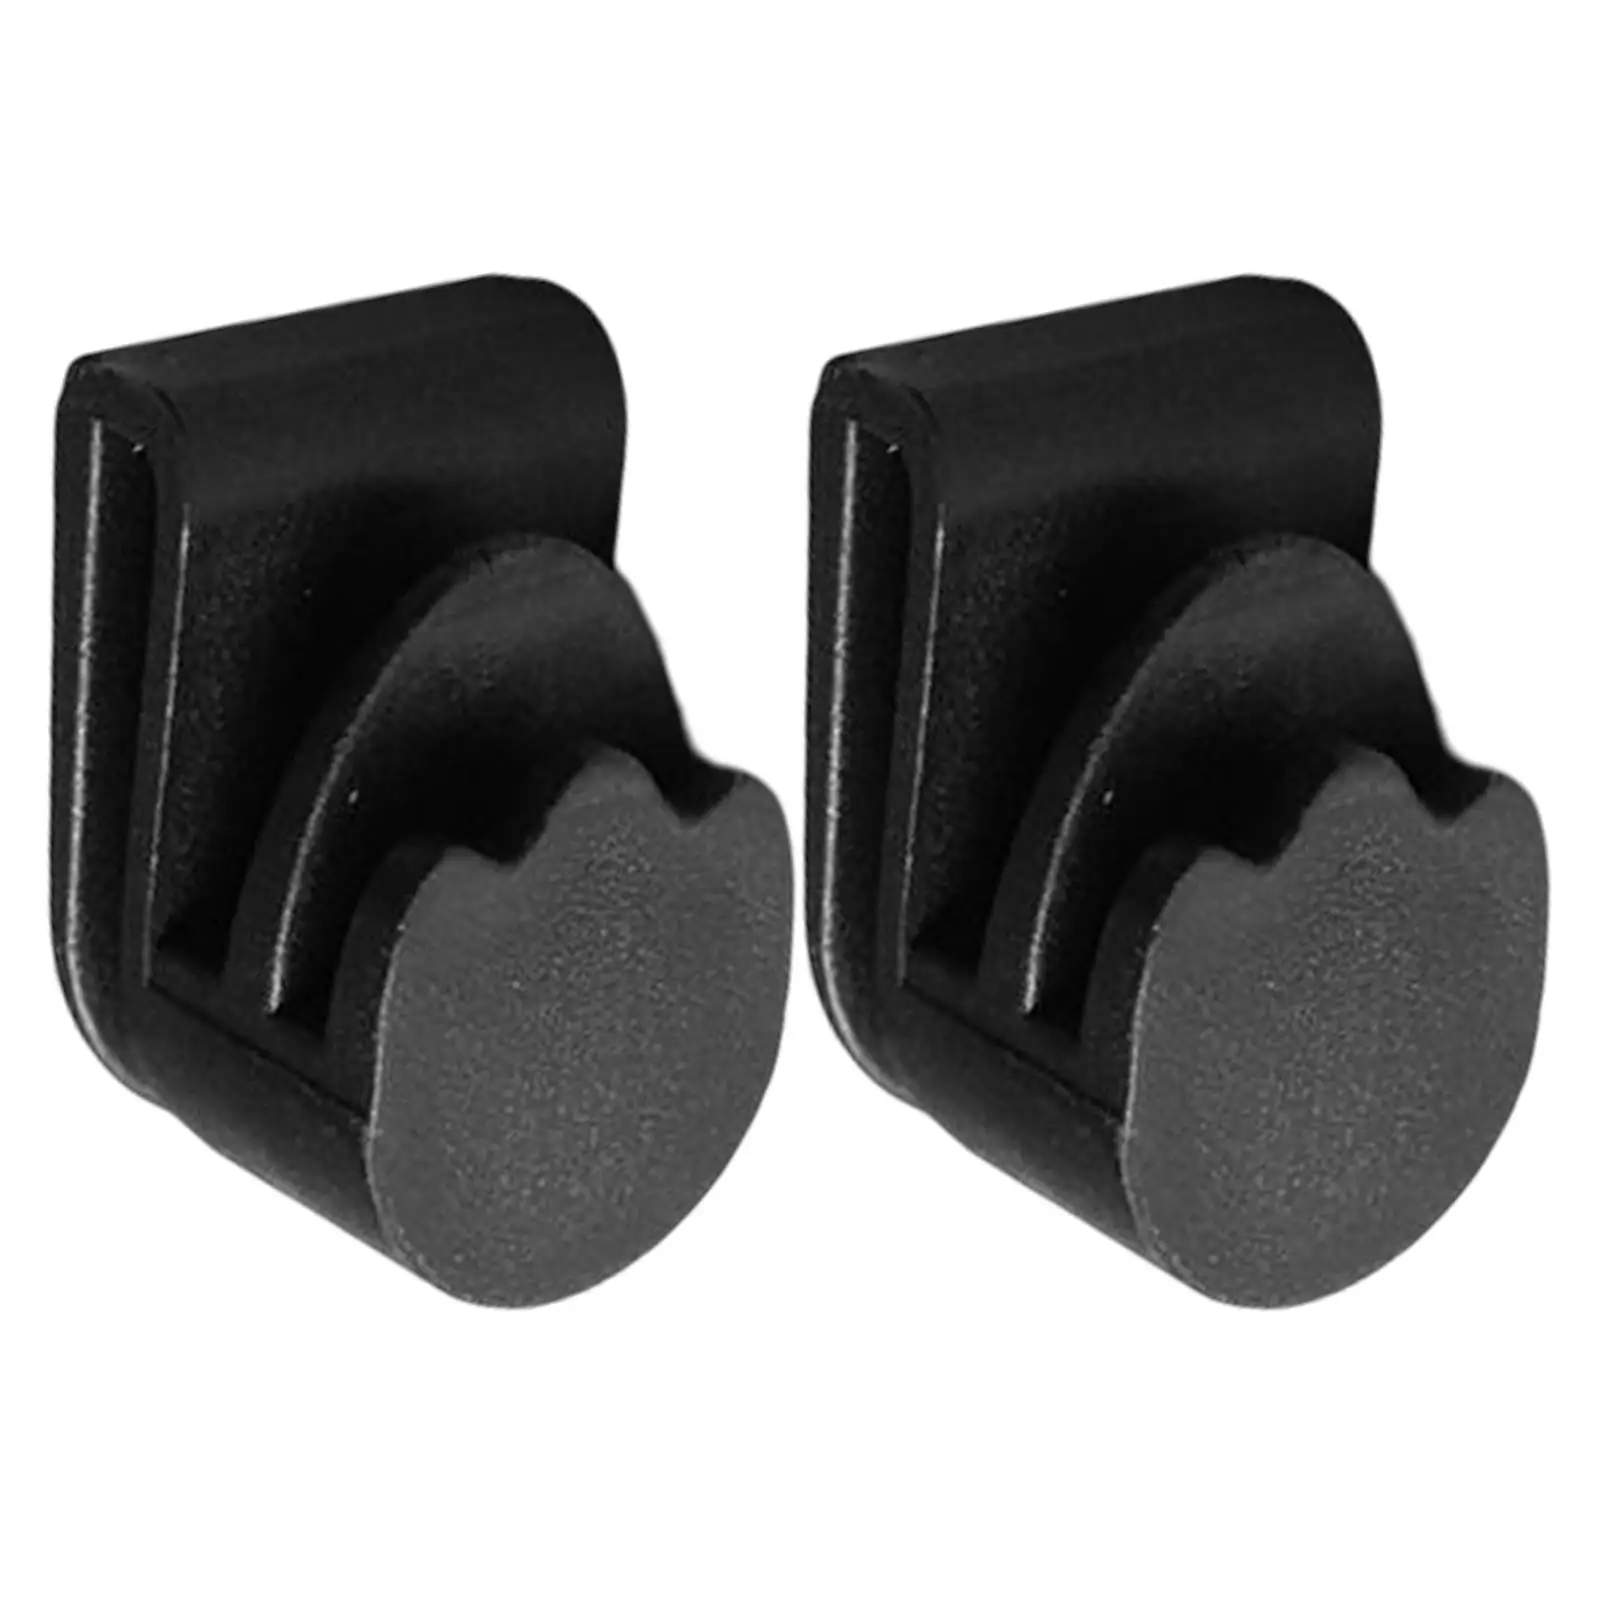 1Pair Front Trunk Hooks Fits for Tesla Model Y 2021 High Performance Premium